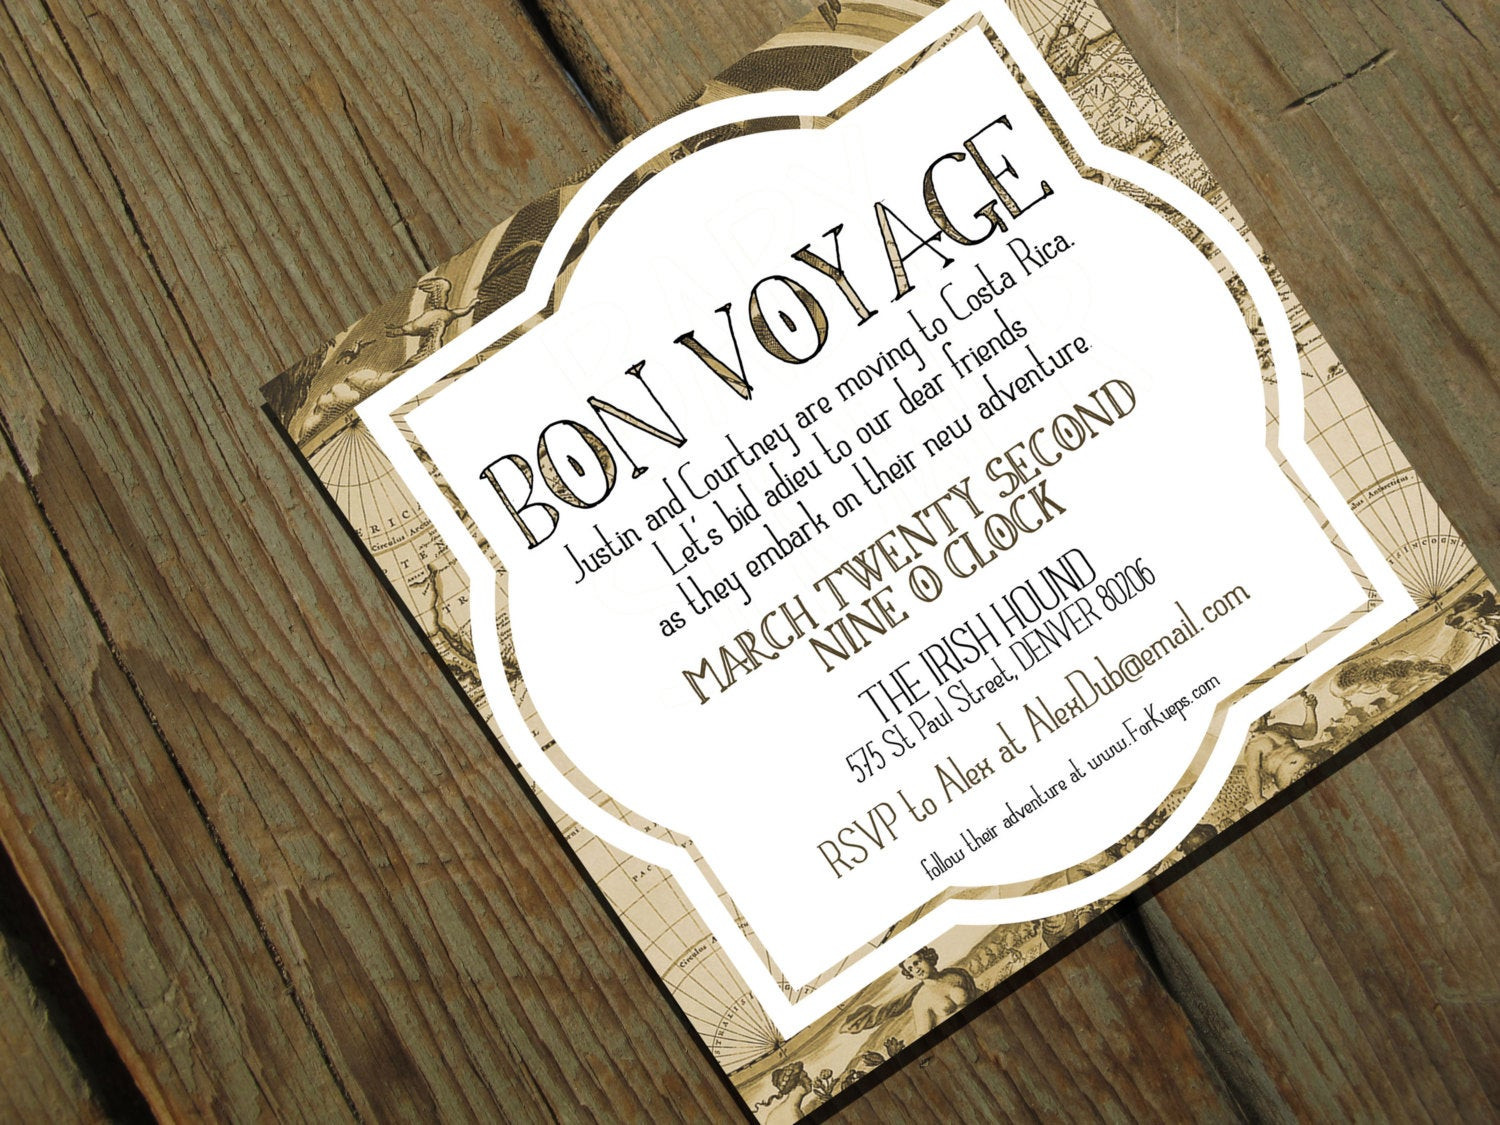 Bon Voyage Retirement Party Ideas
 Bon Voyage Going Away Party Invitation Moving by